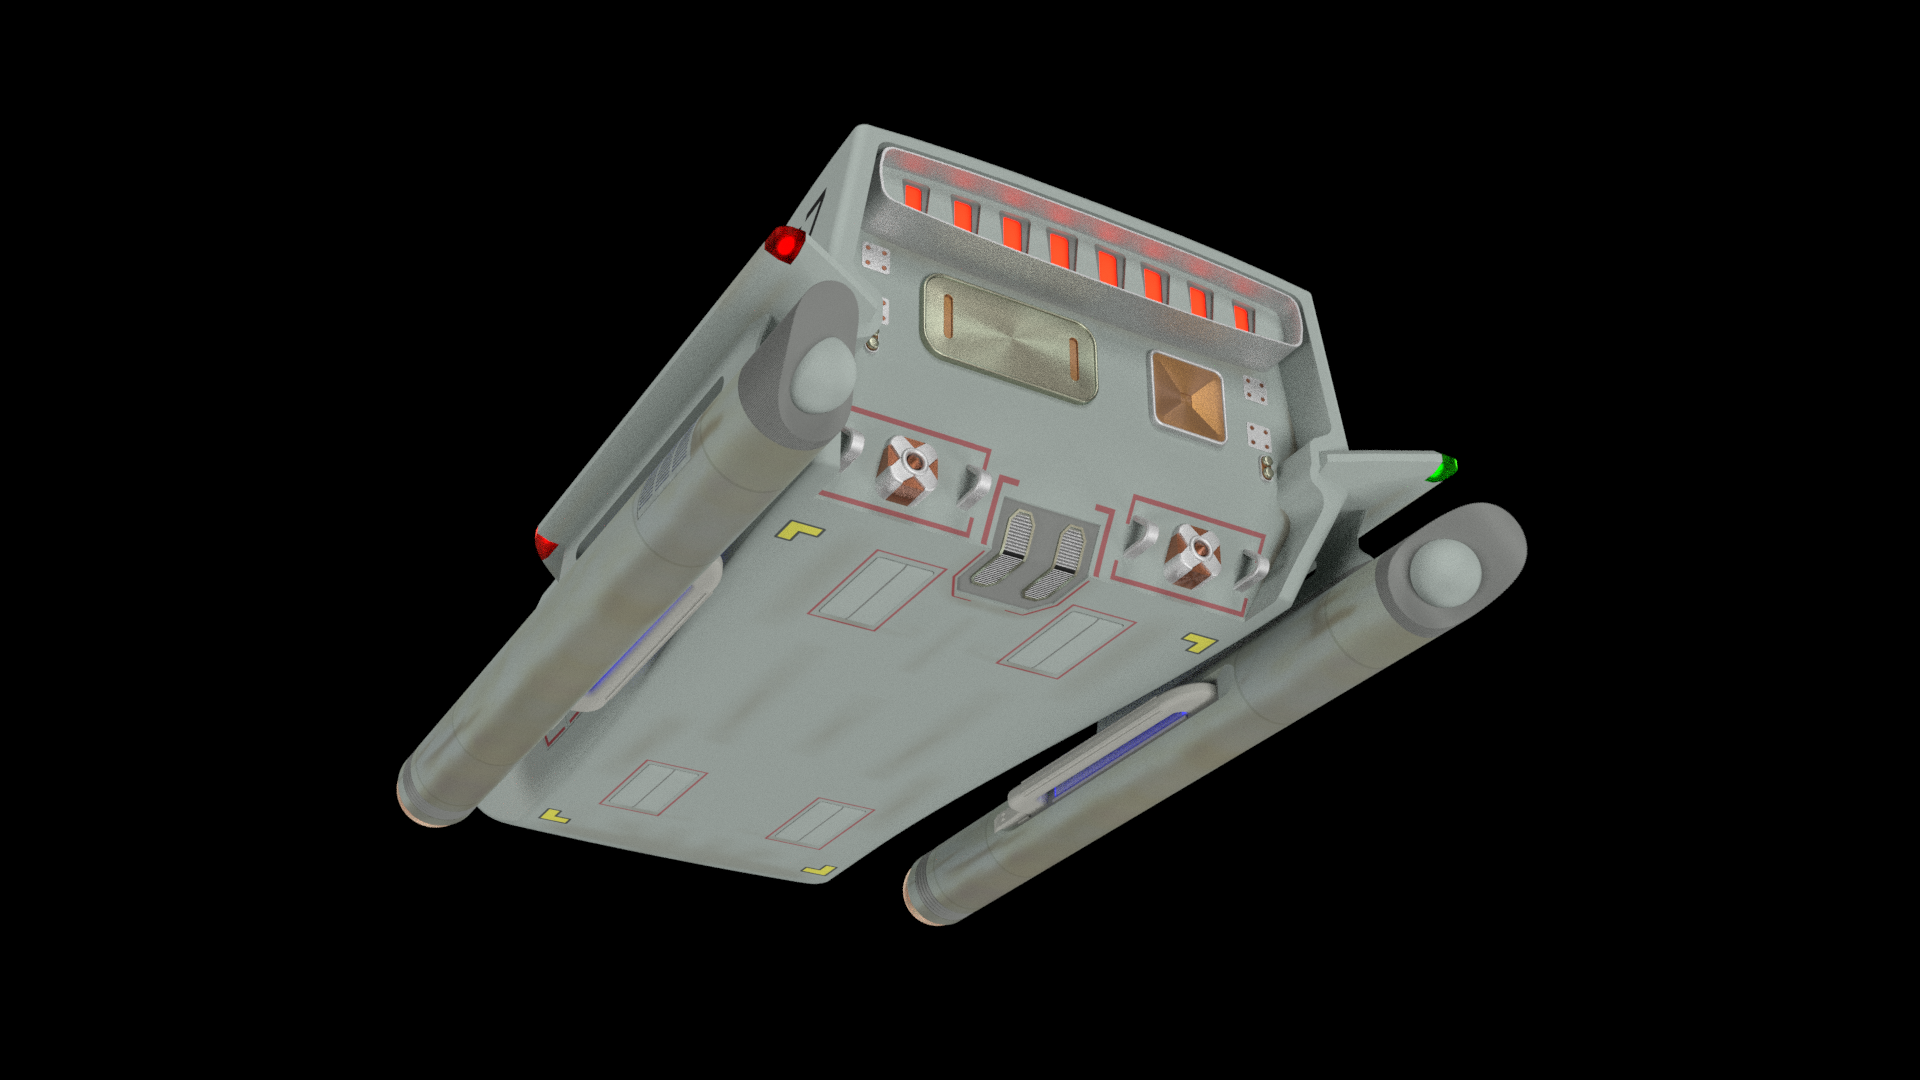 tos-shuttle-190605-01.png